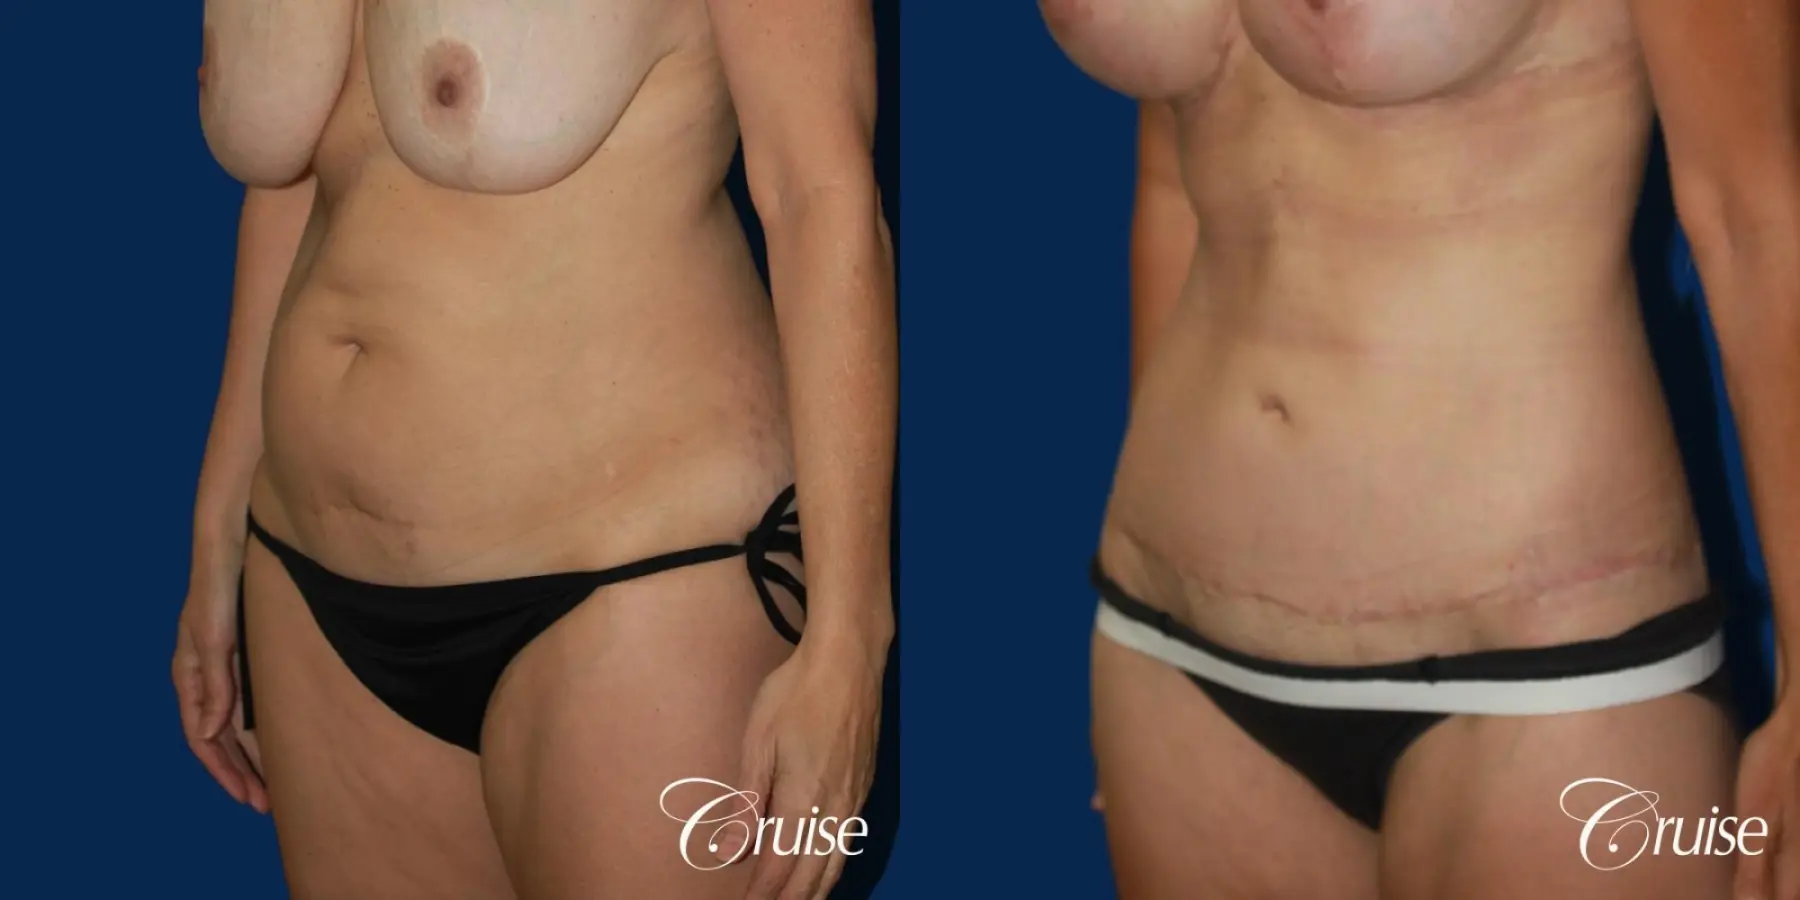 47 Yr Old Liposuction & Circumferential Incision Tummy Tuck - Before and After 3